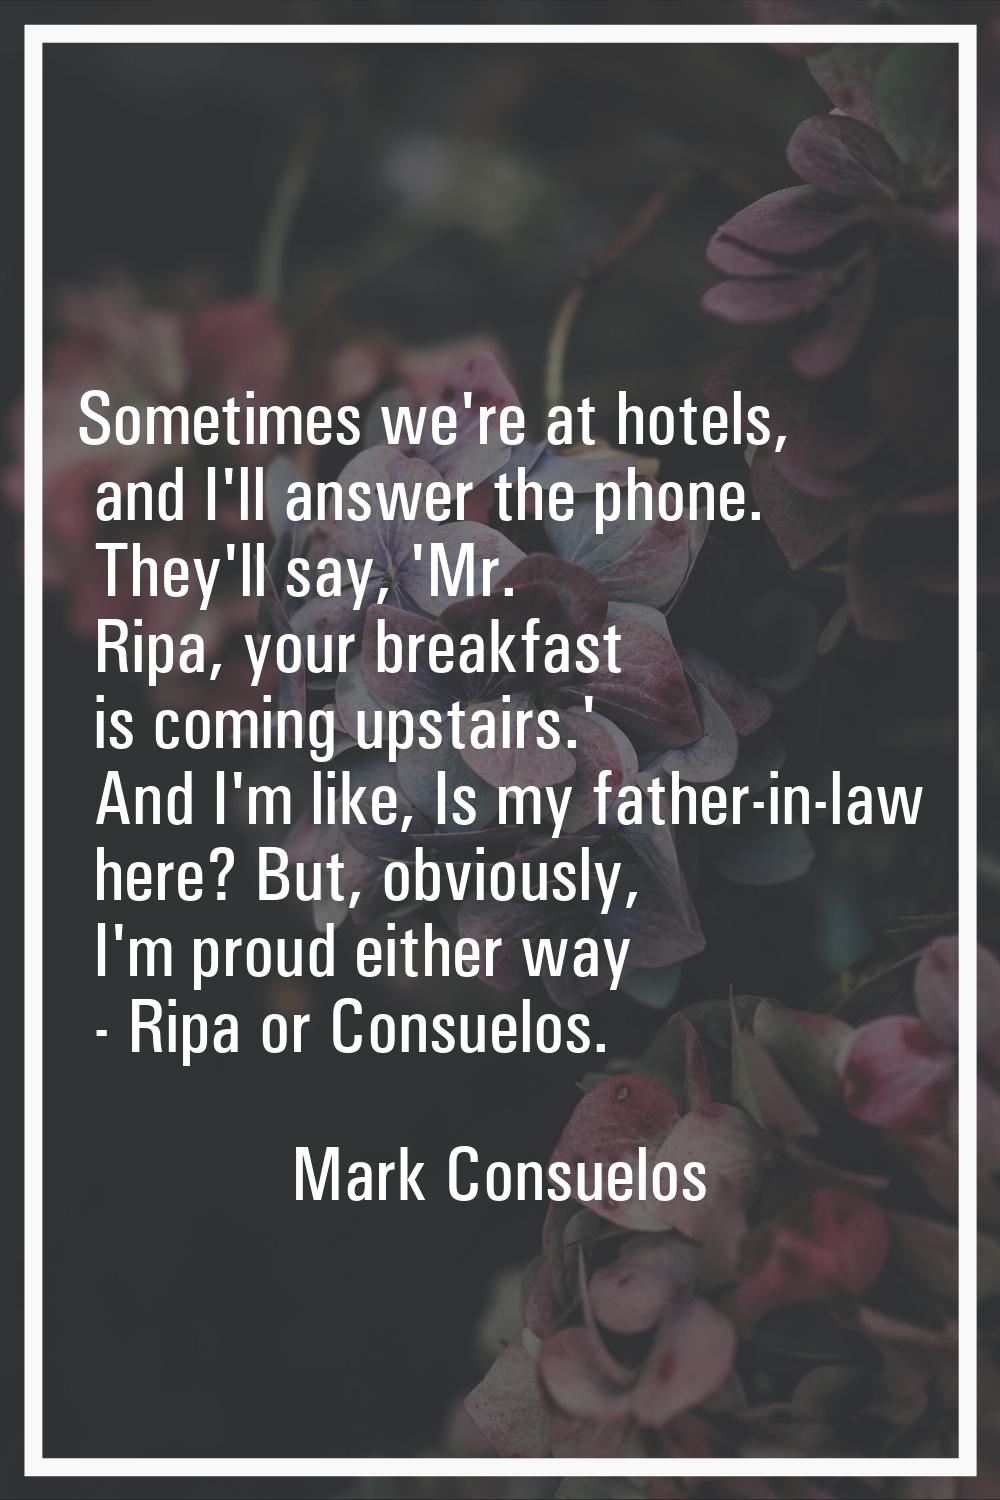 Sometimes we're at hotels, and I'll answer the phone. They'll say, 'Mr. Ripa, your breakfast is com